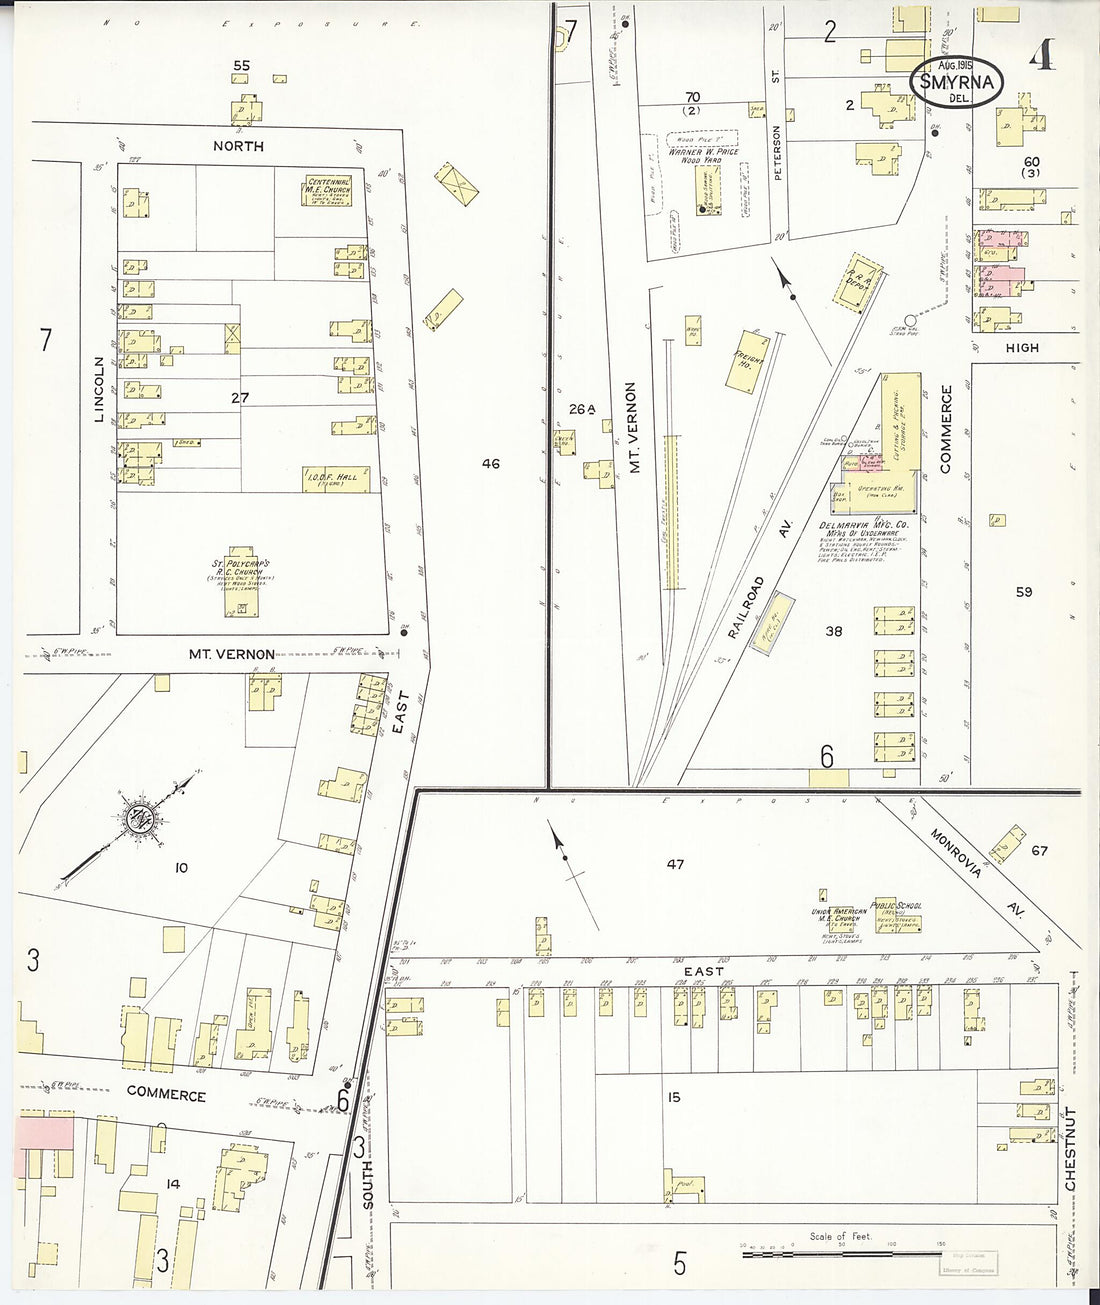 This old map of Smyrna, Kent County, Delaware was created by Sanborn Map Company in 1915